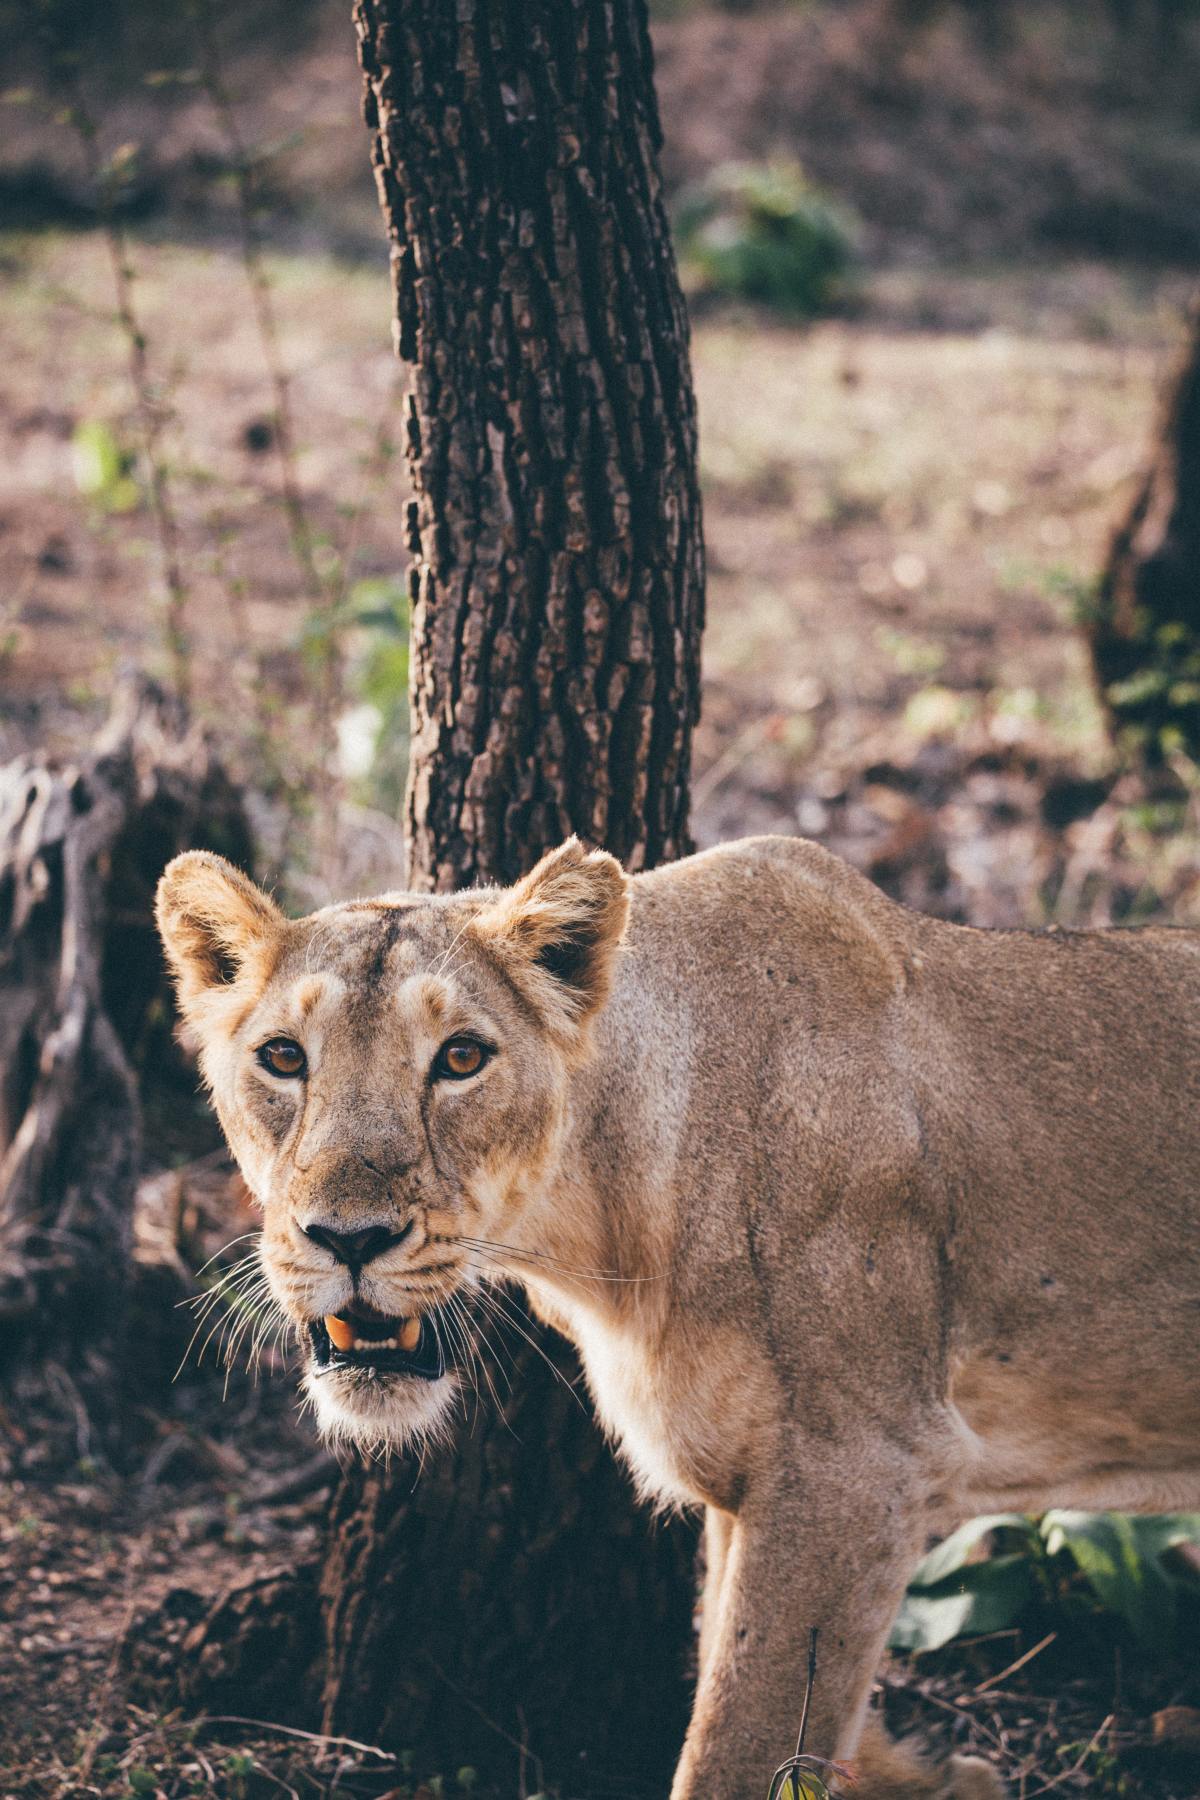 Female lion scowling in front of thin tree in plains.